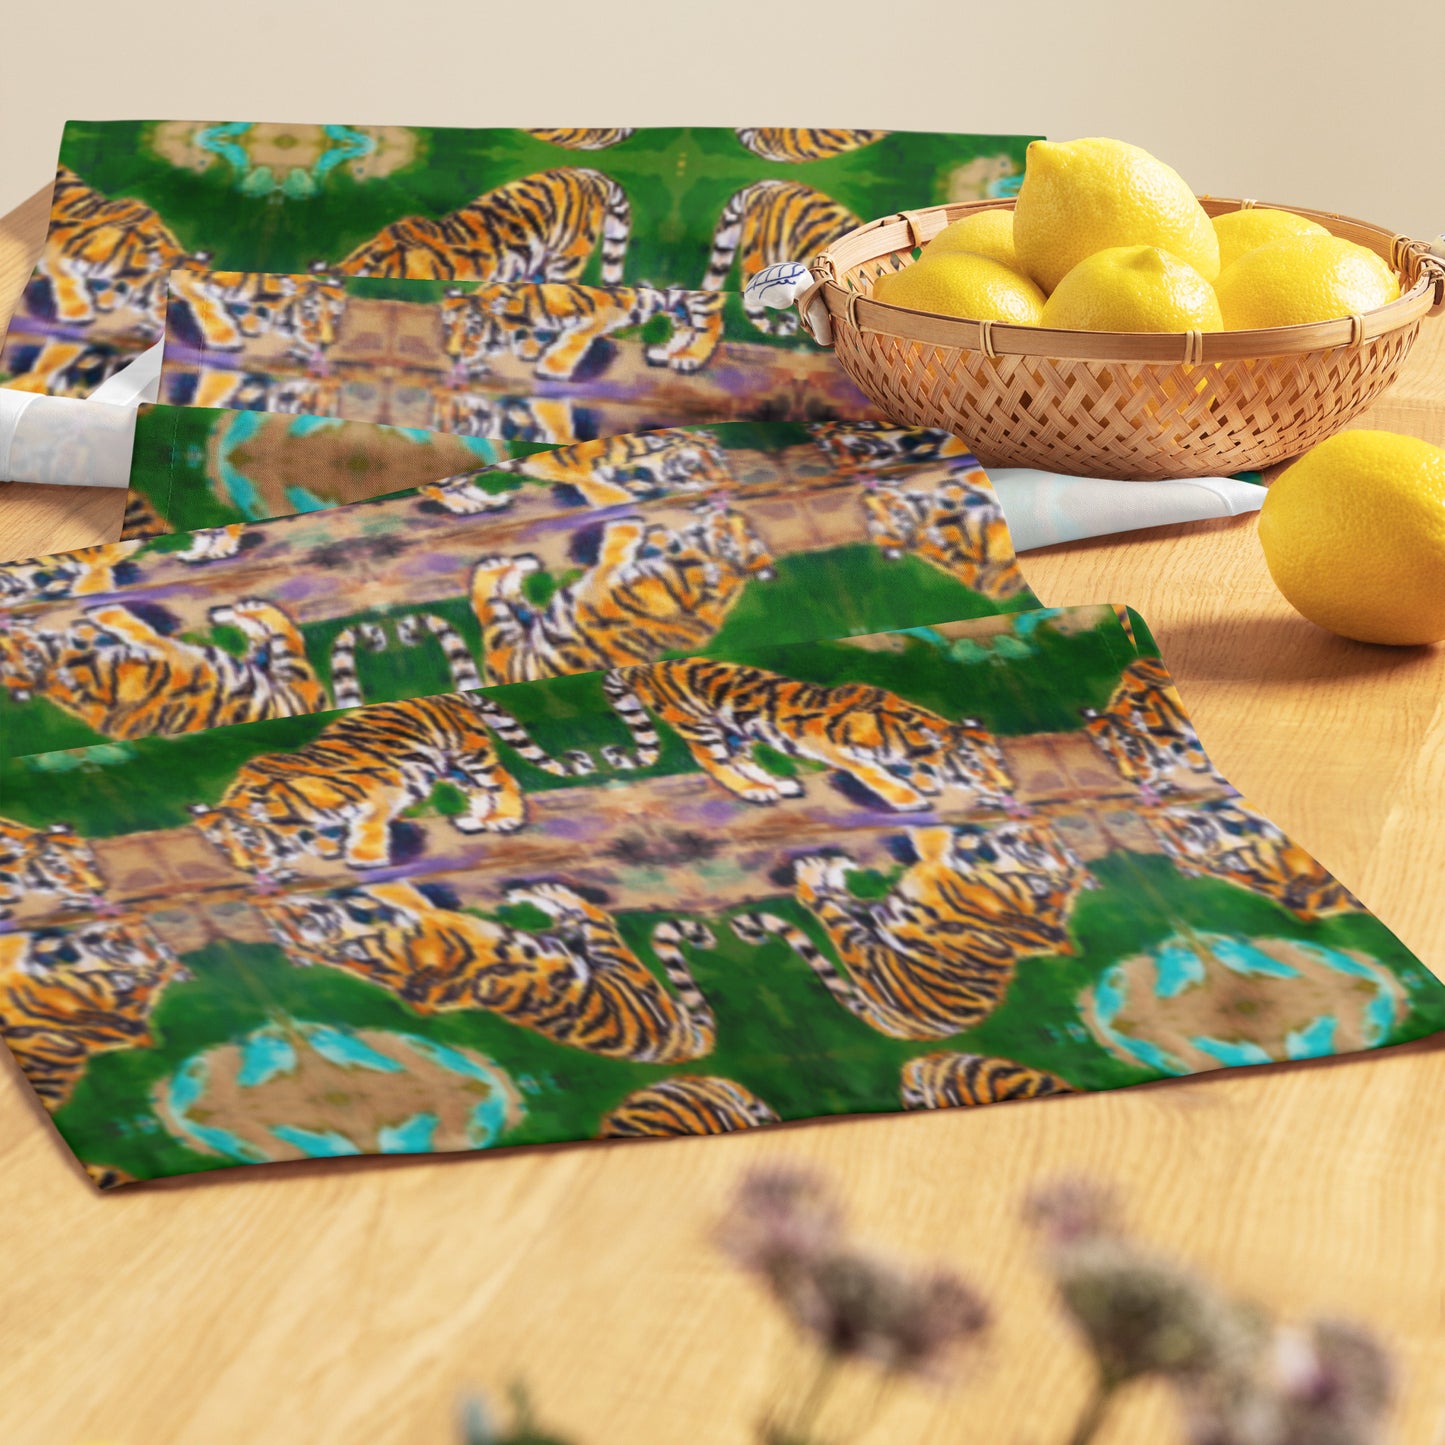 Tiger Reflections Table runner